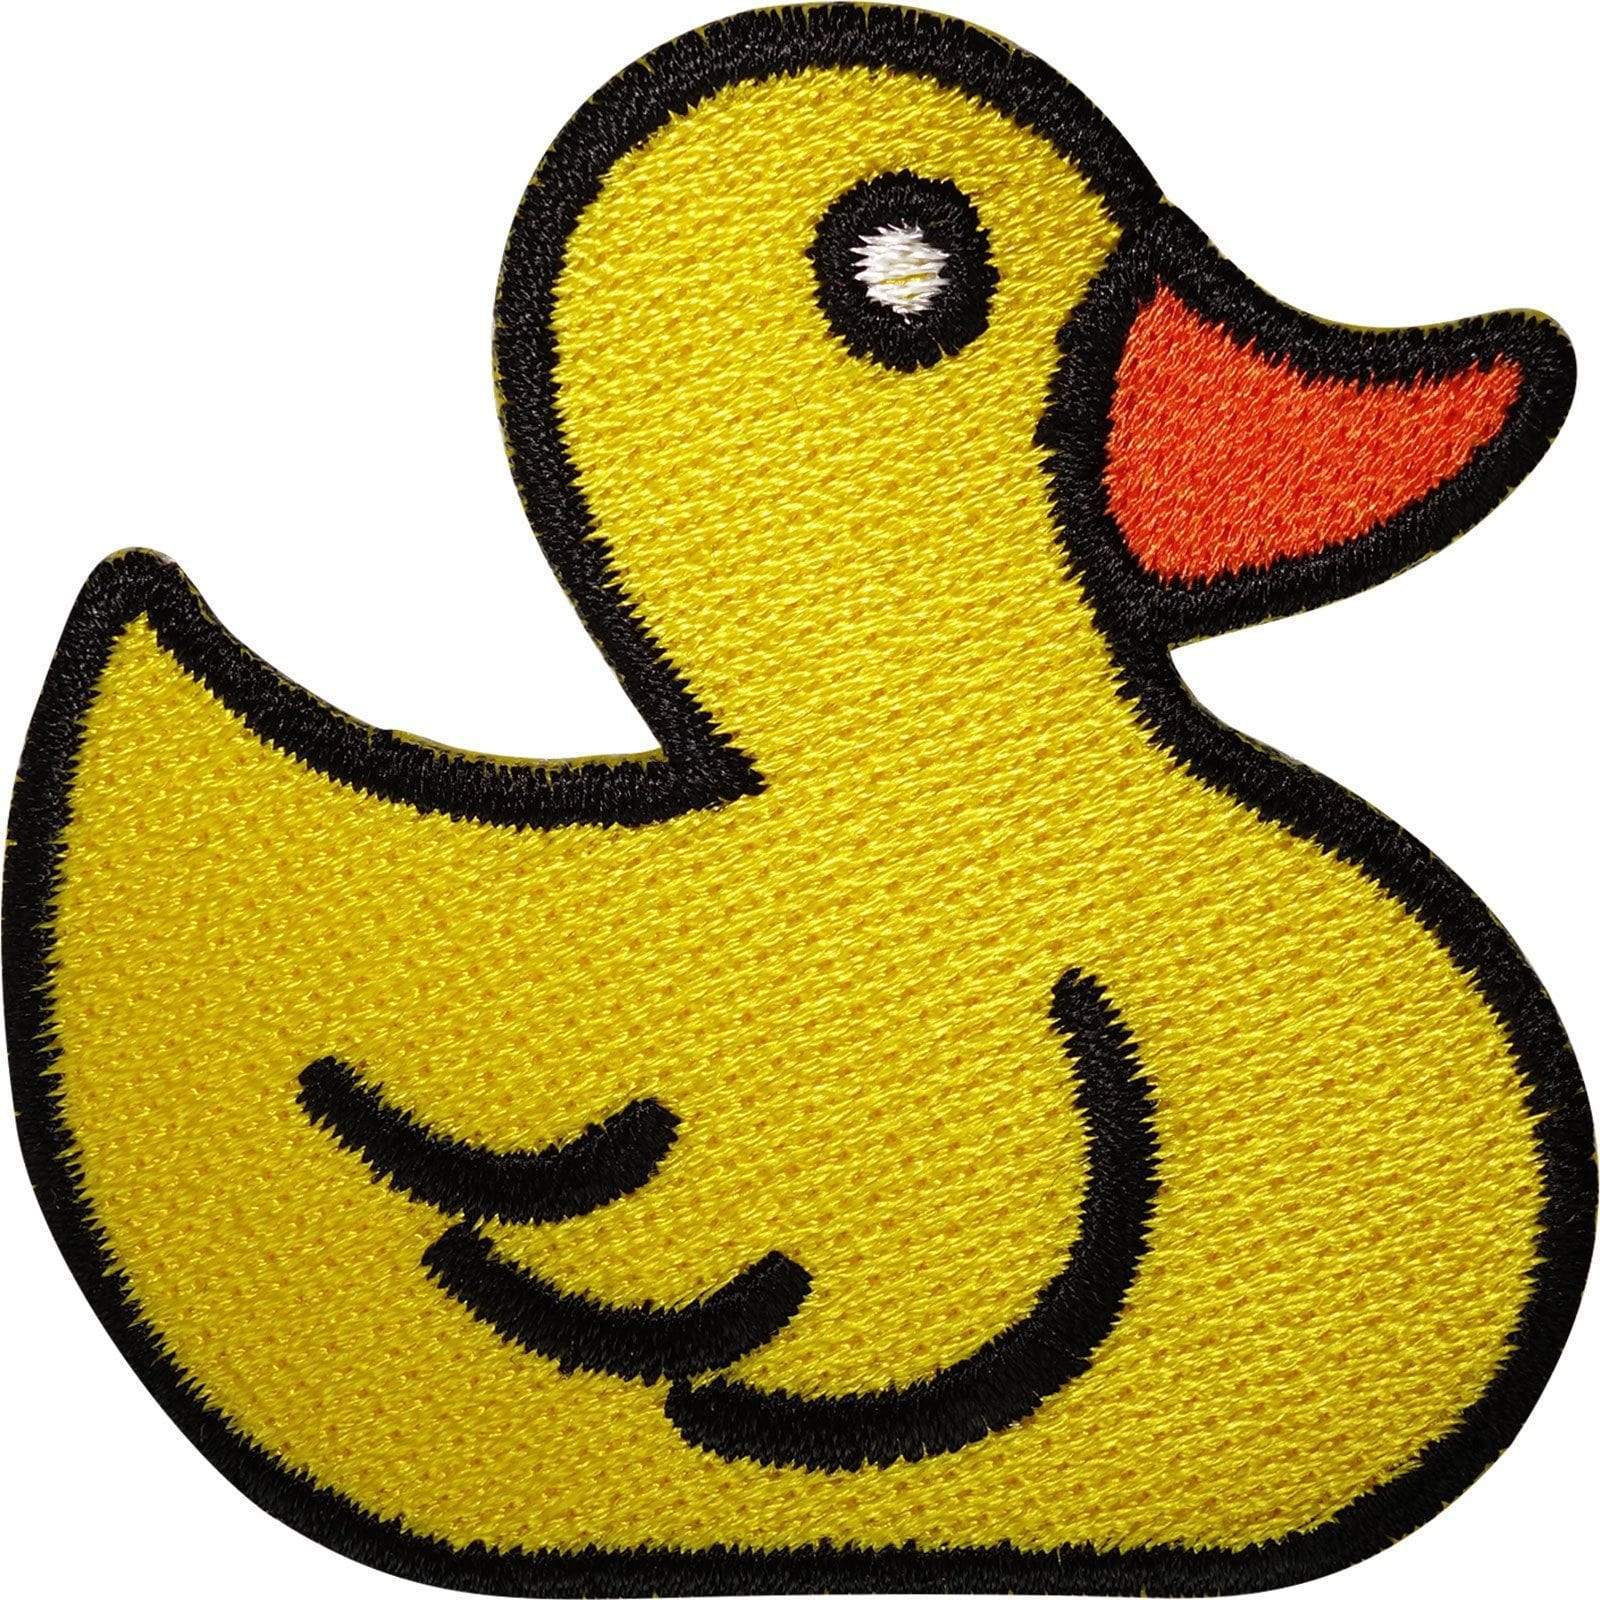 Yellow Rubber Duck Patch Iron Sew On Bird Embroidered Badge Embroidery Applique